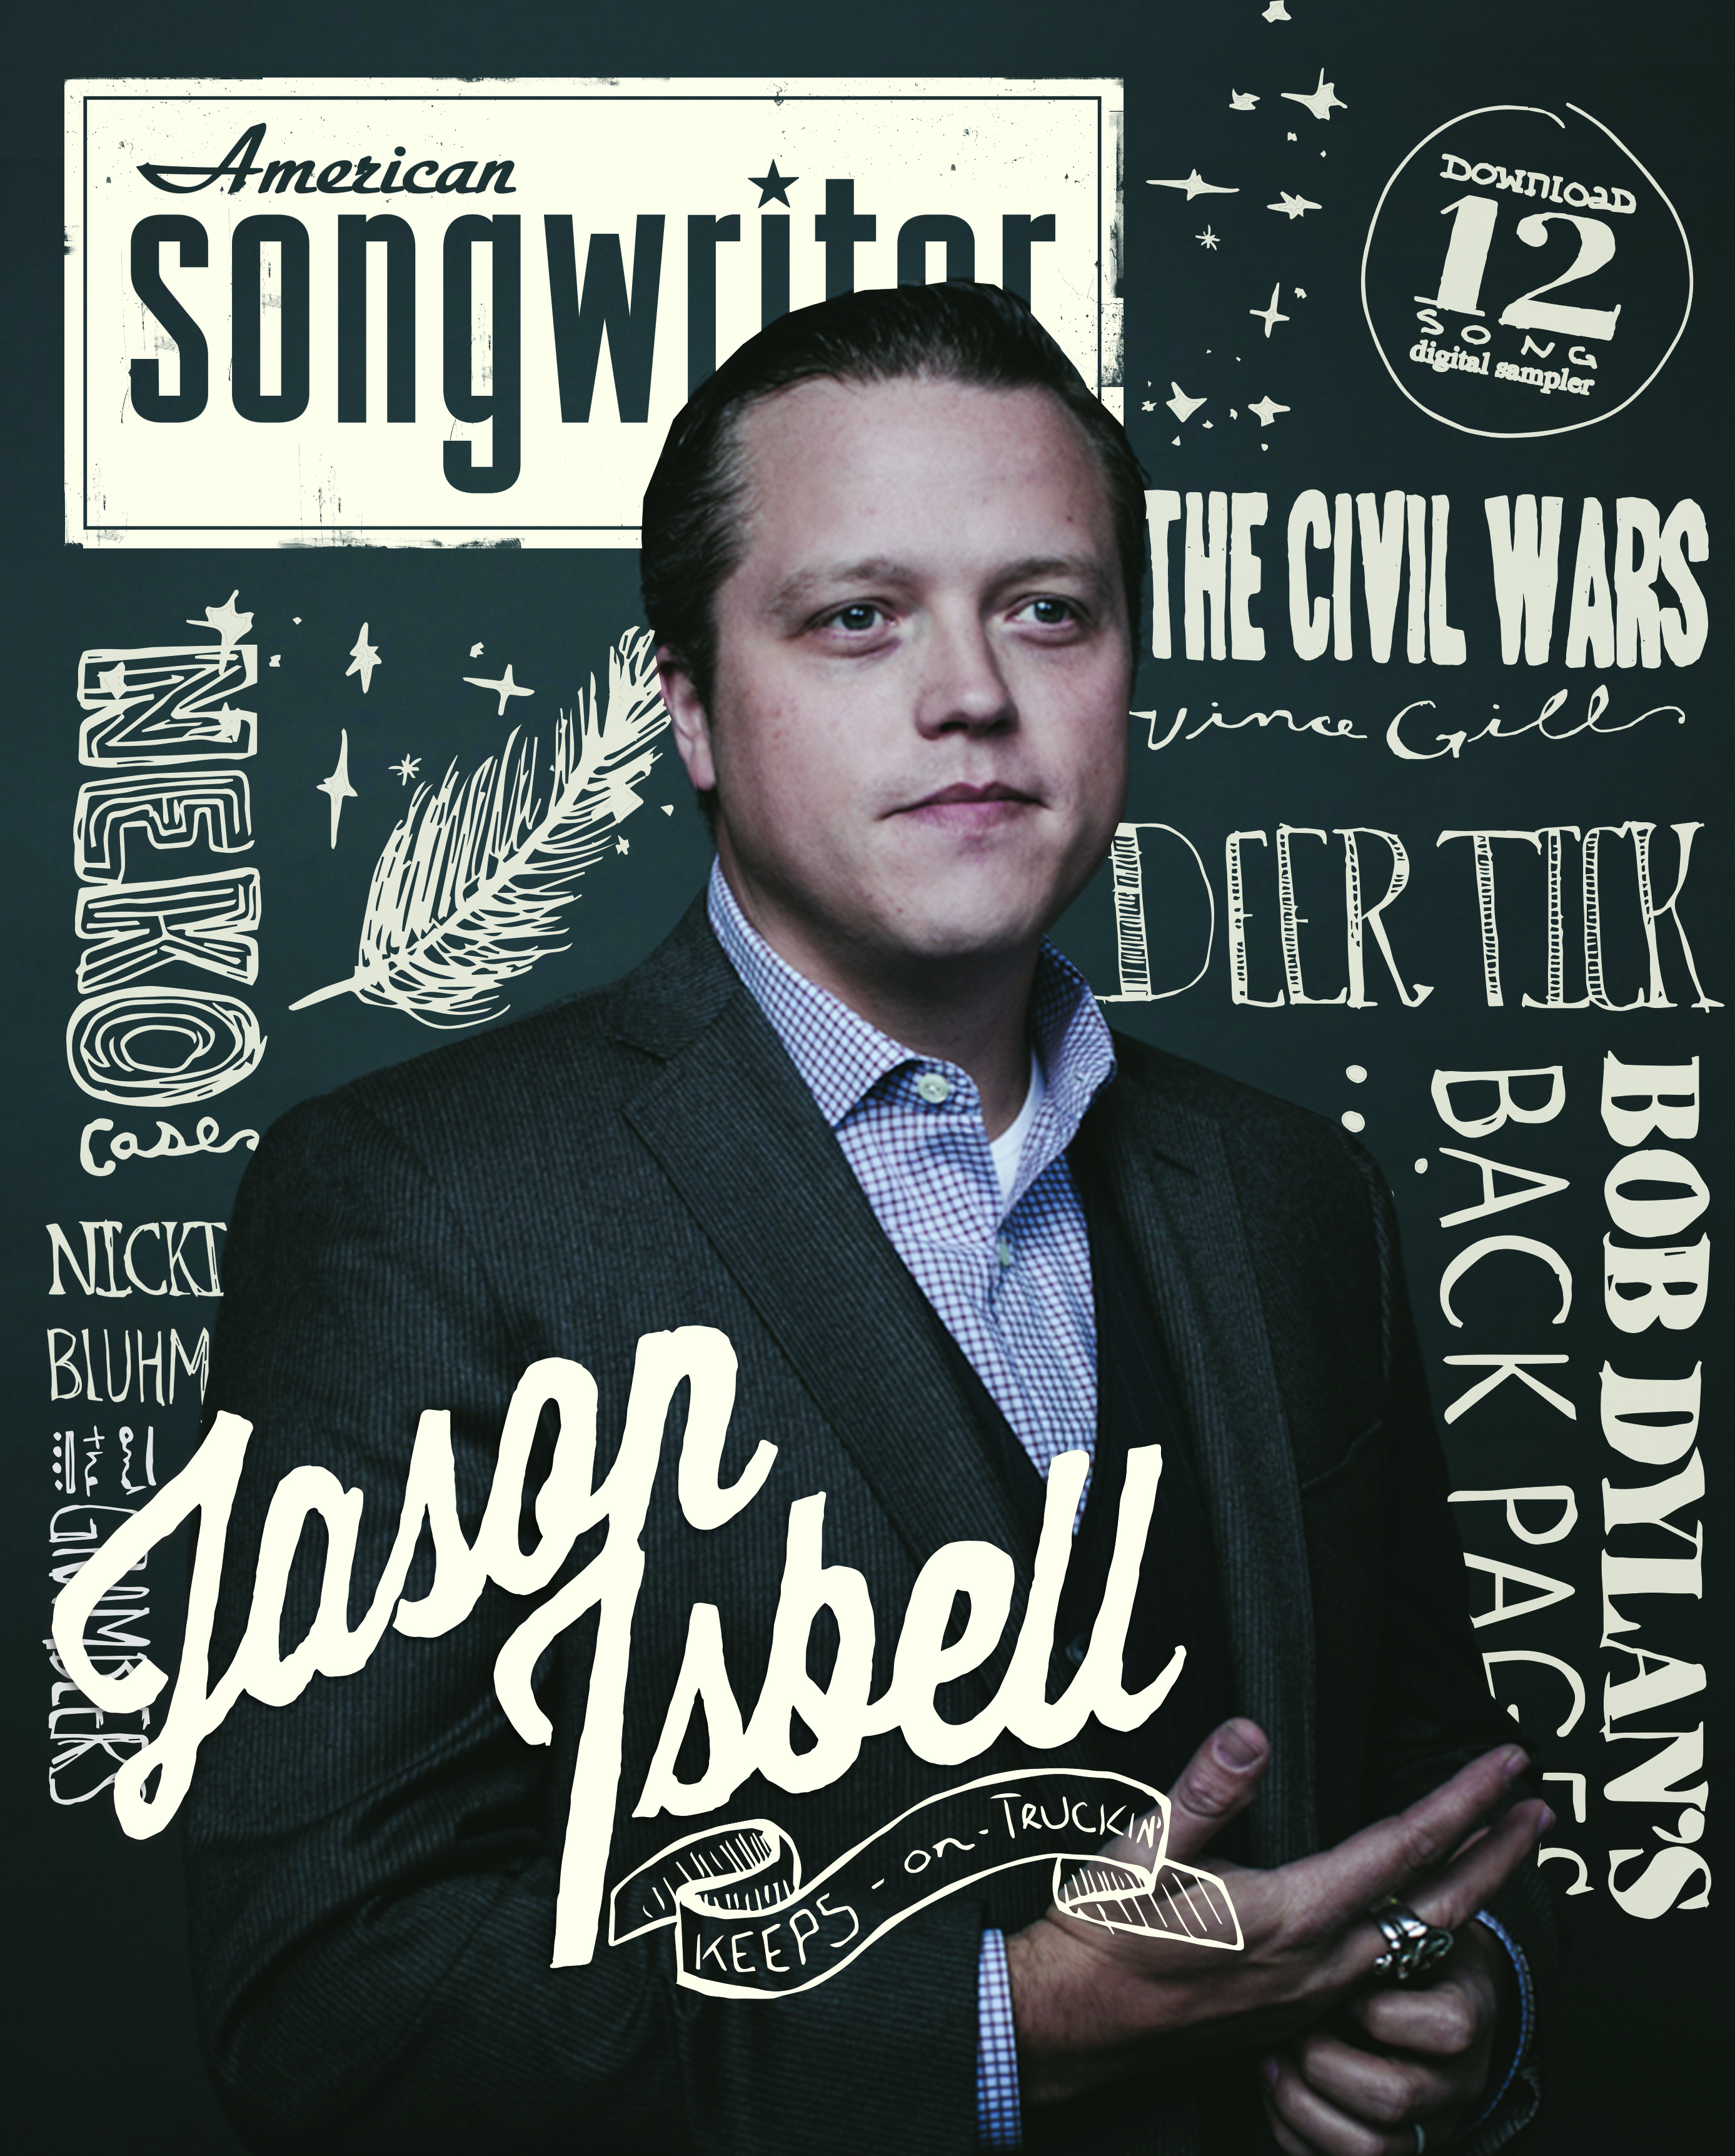 Order The September/October Issue With Jason Isbell